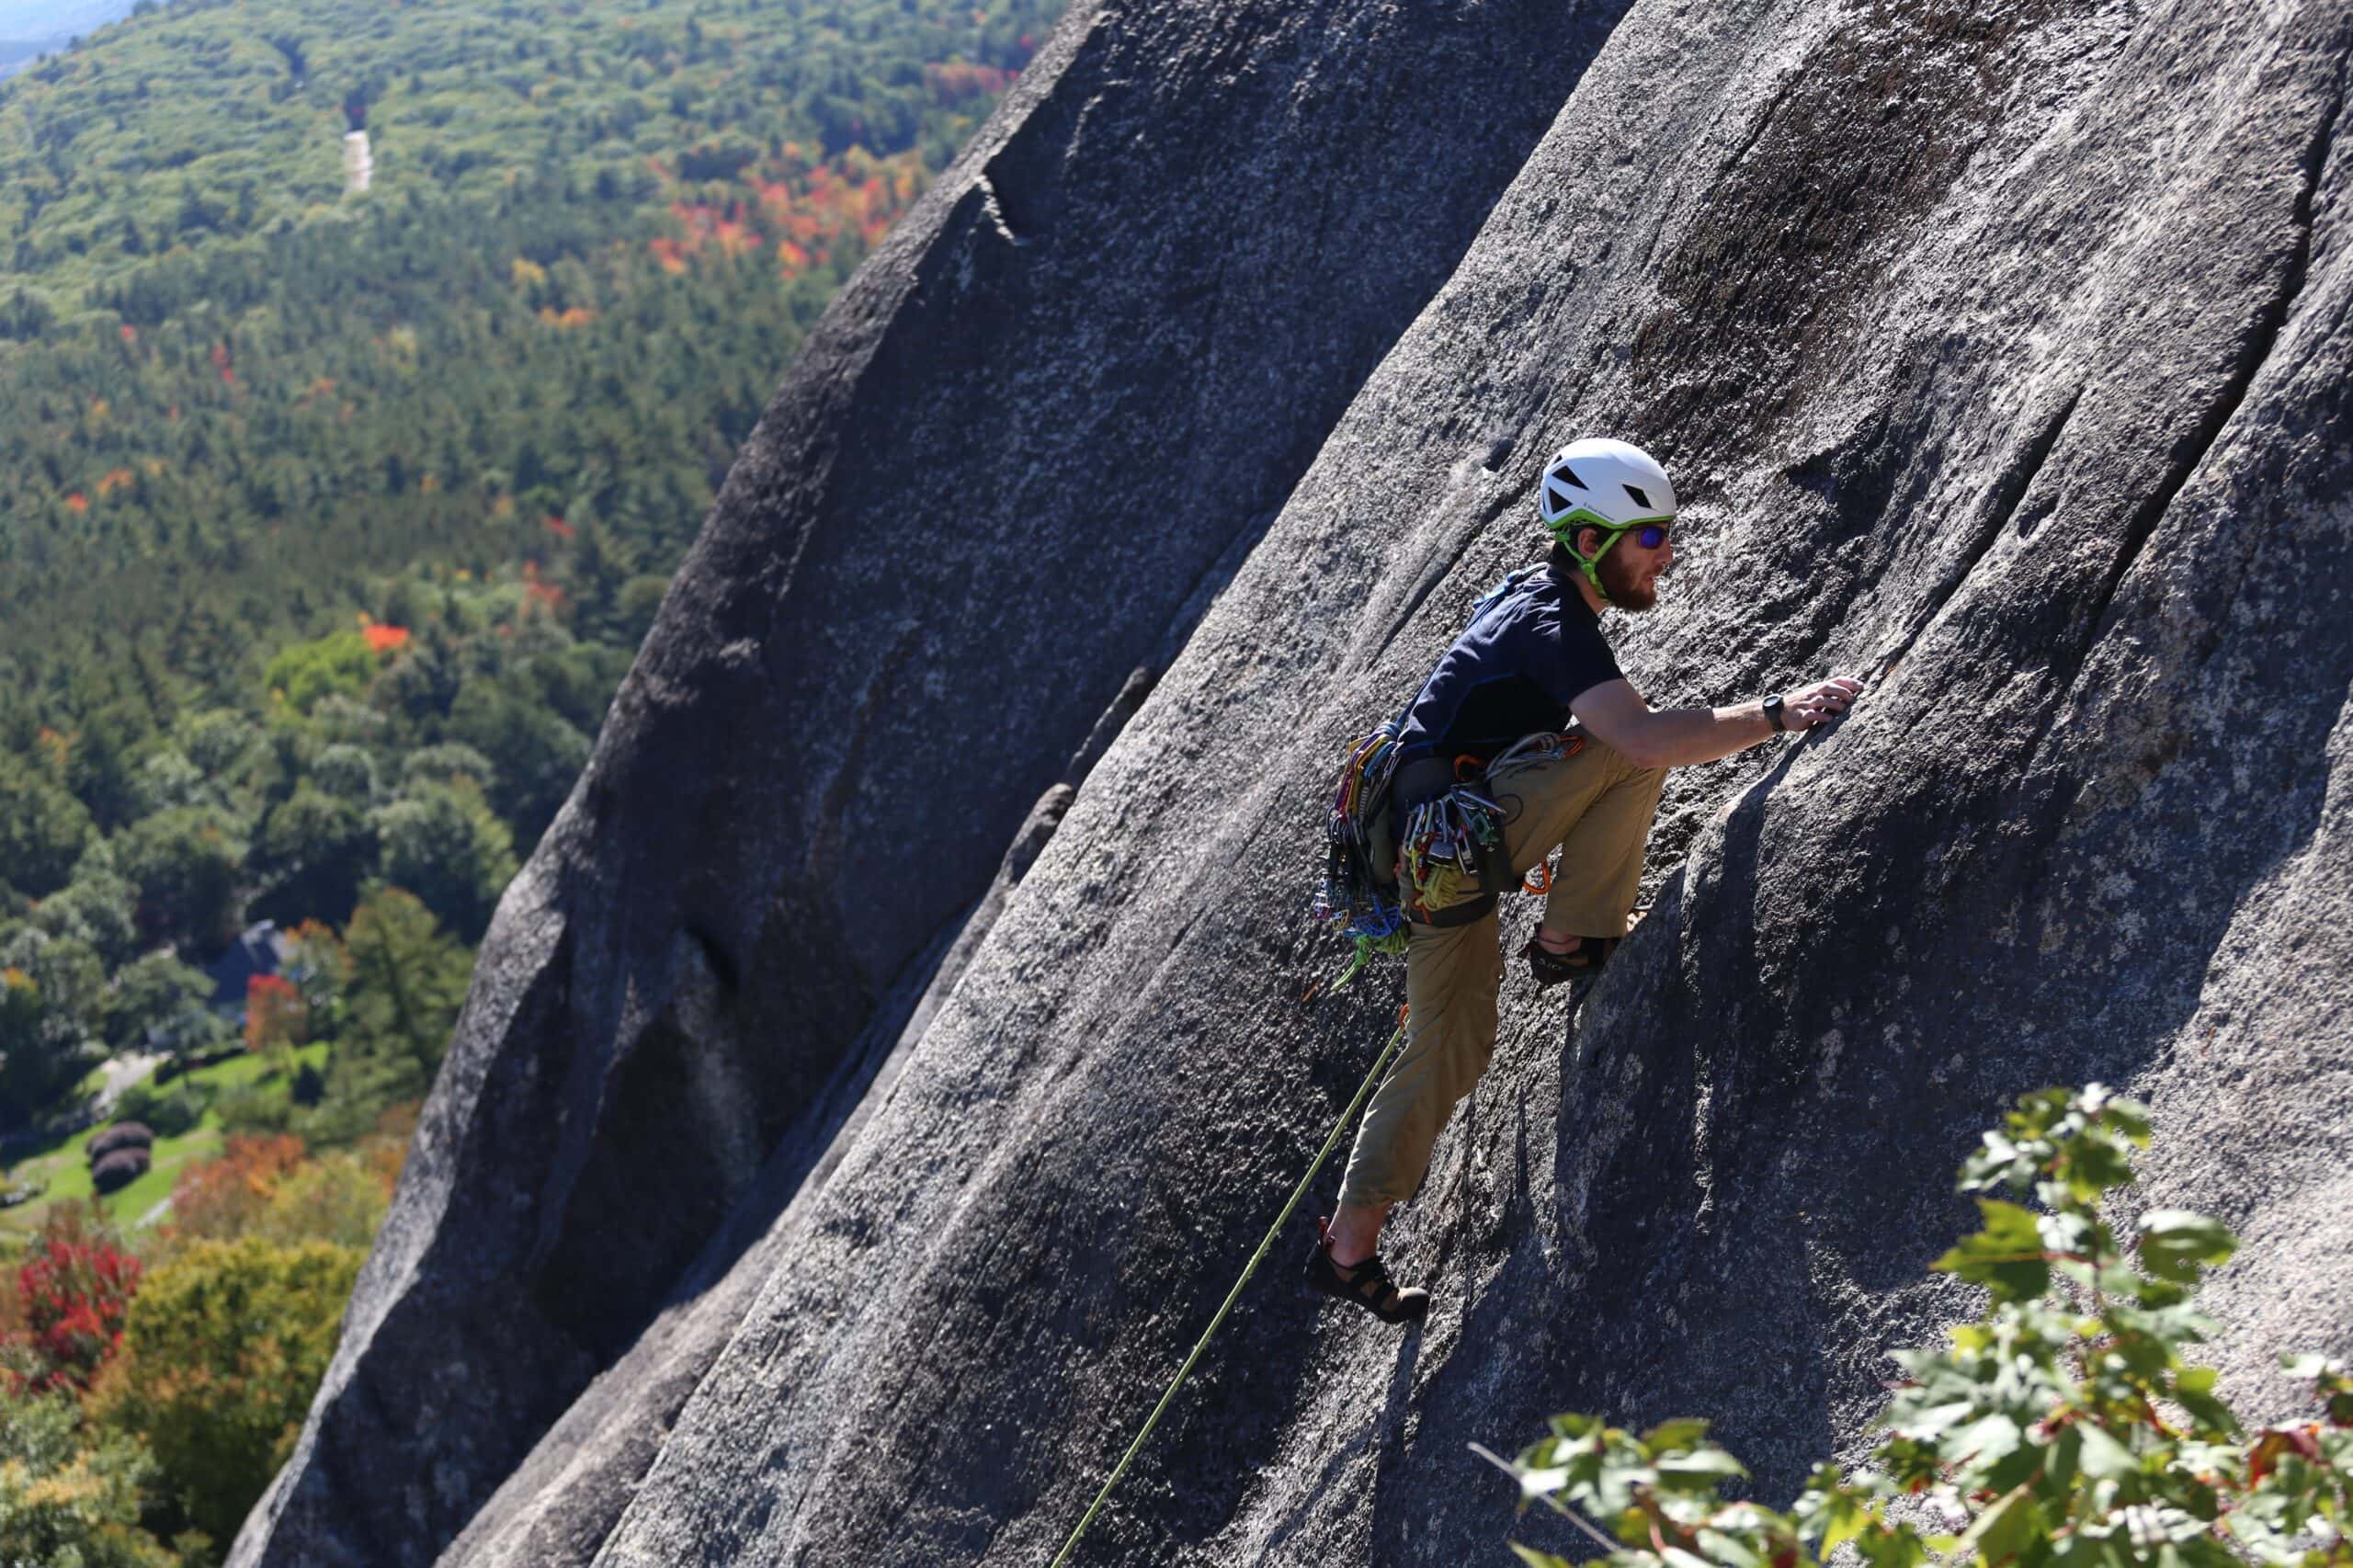 A person in a helmet and harness scales the side of a high rock face.